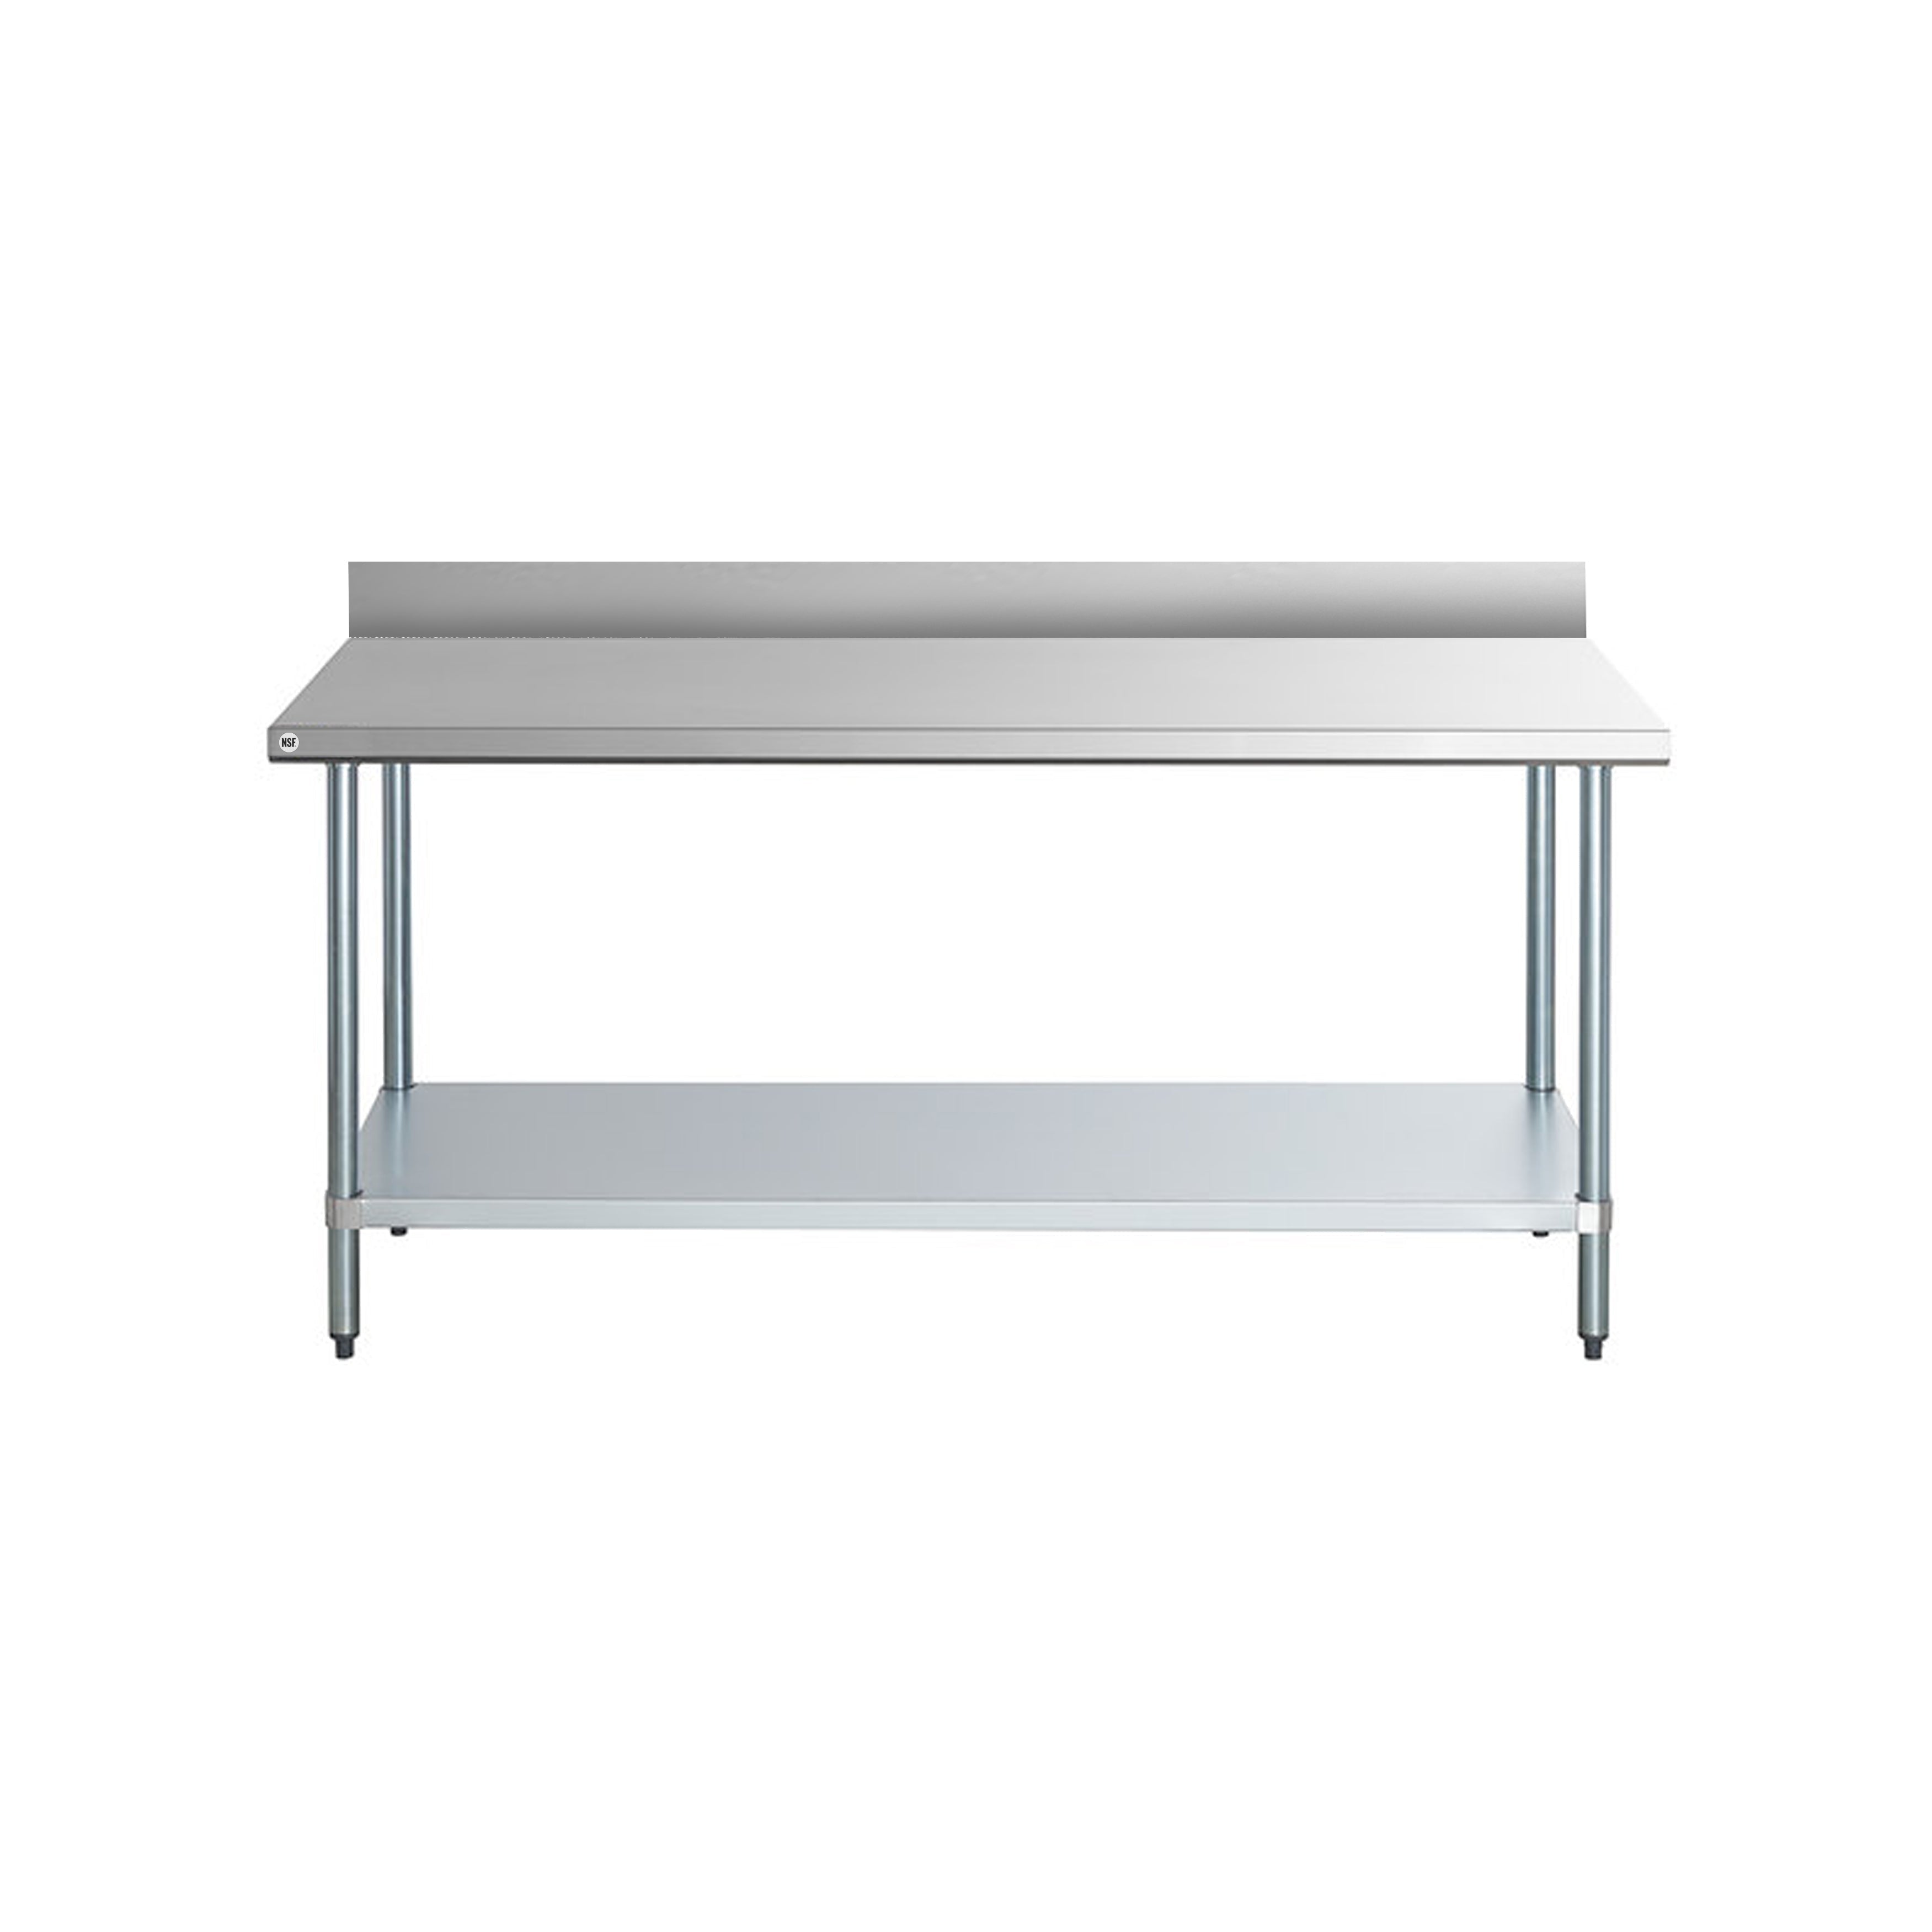 Omcan - 23804, Commercial 60" x 30" Stainless Steel Kitchen Work Table with 4" Back Splash 1200lbs Medium Duty